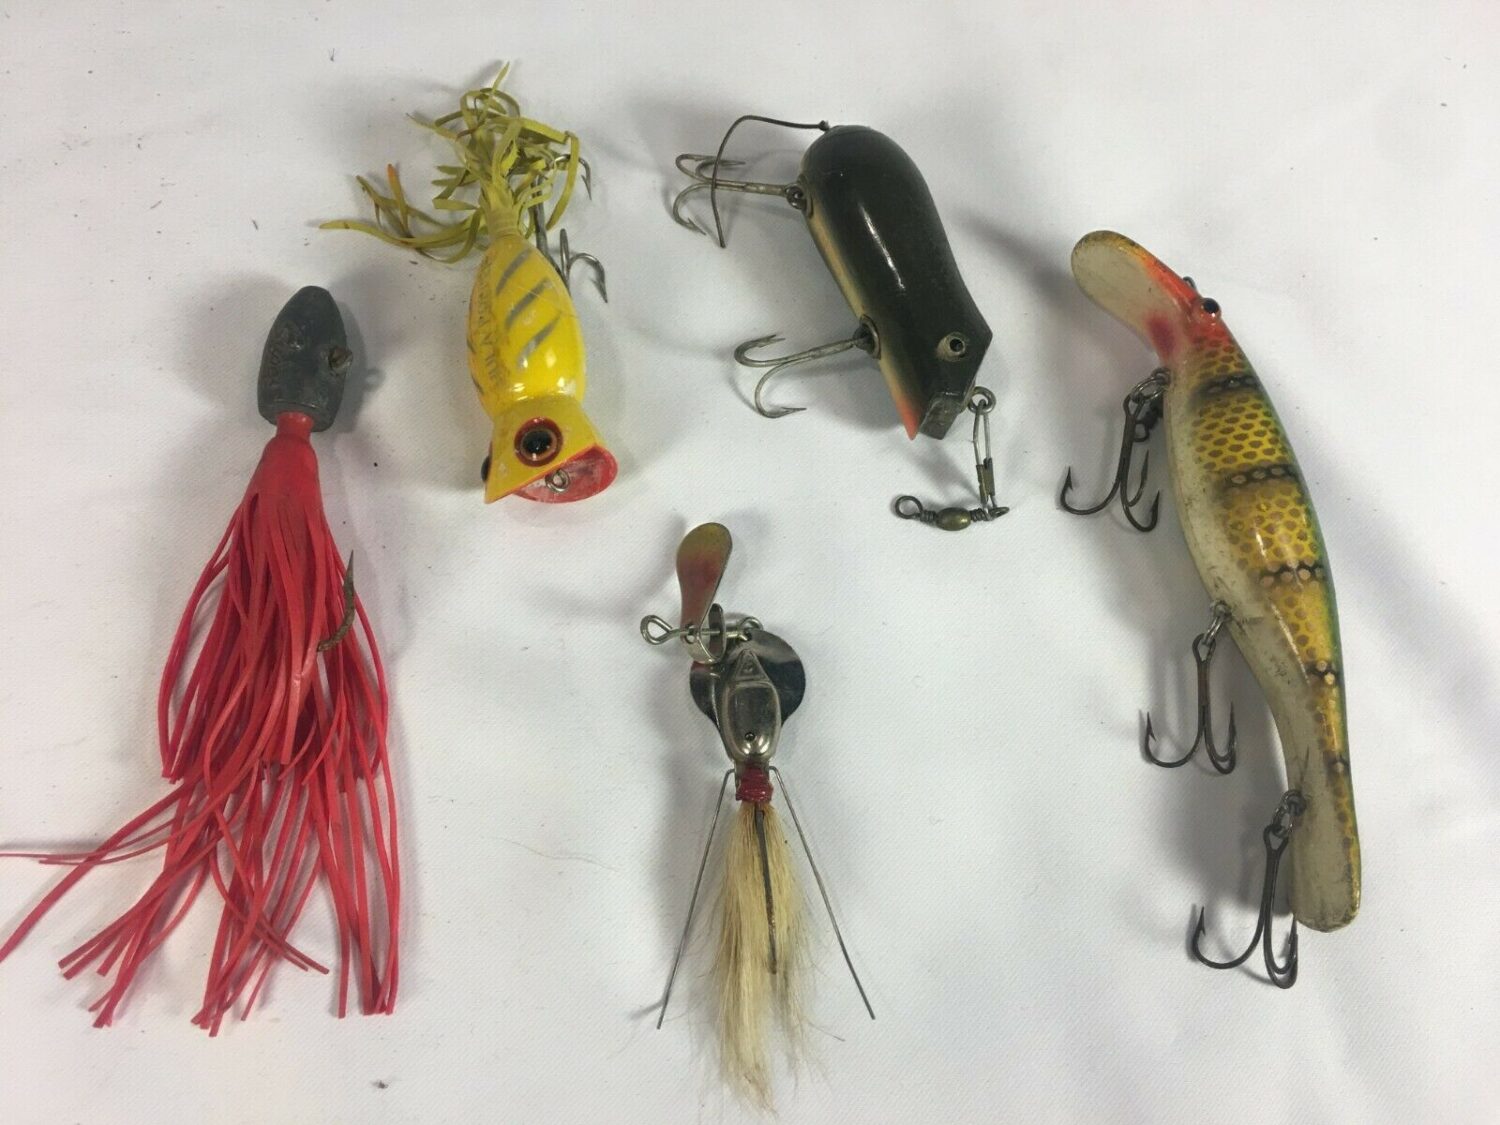 VINTAGE FISHING LURES - LOT OF 17 Great Old Time Tackle